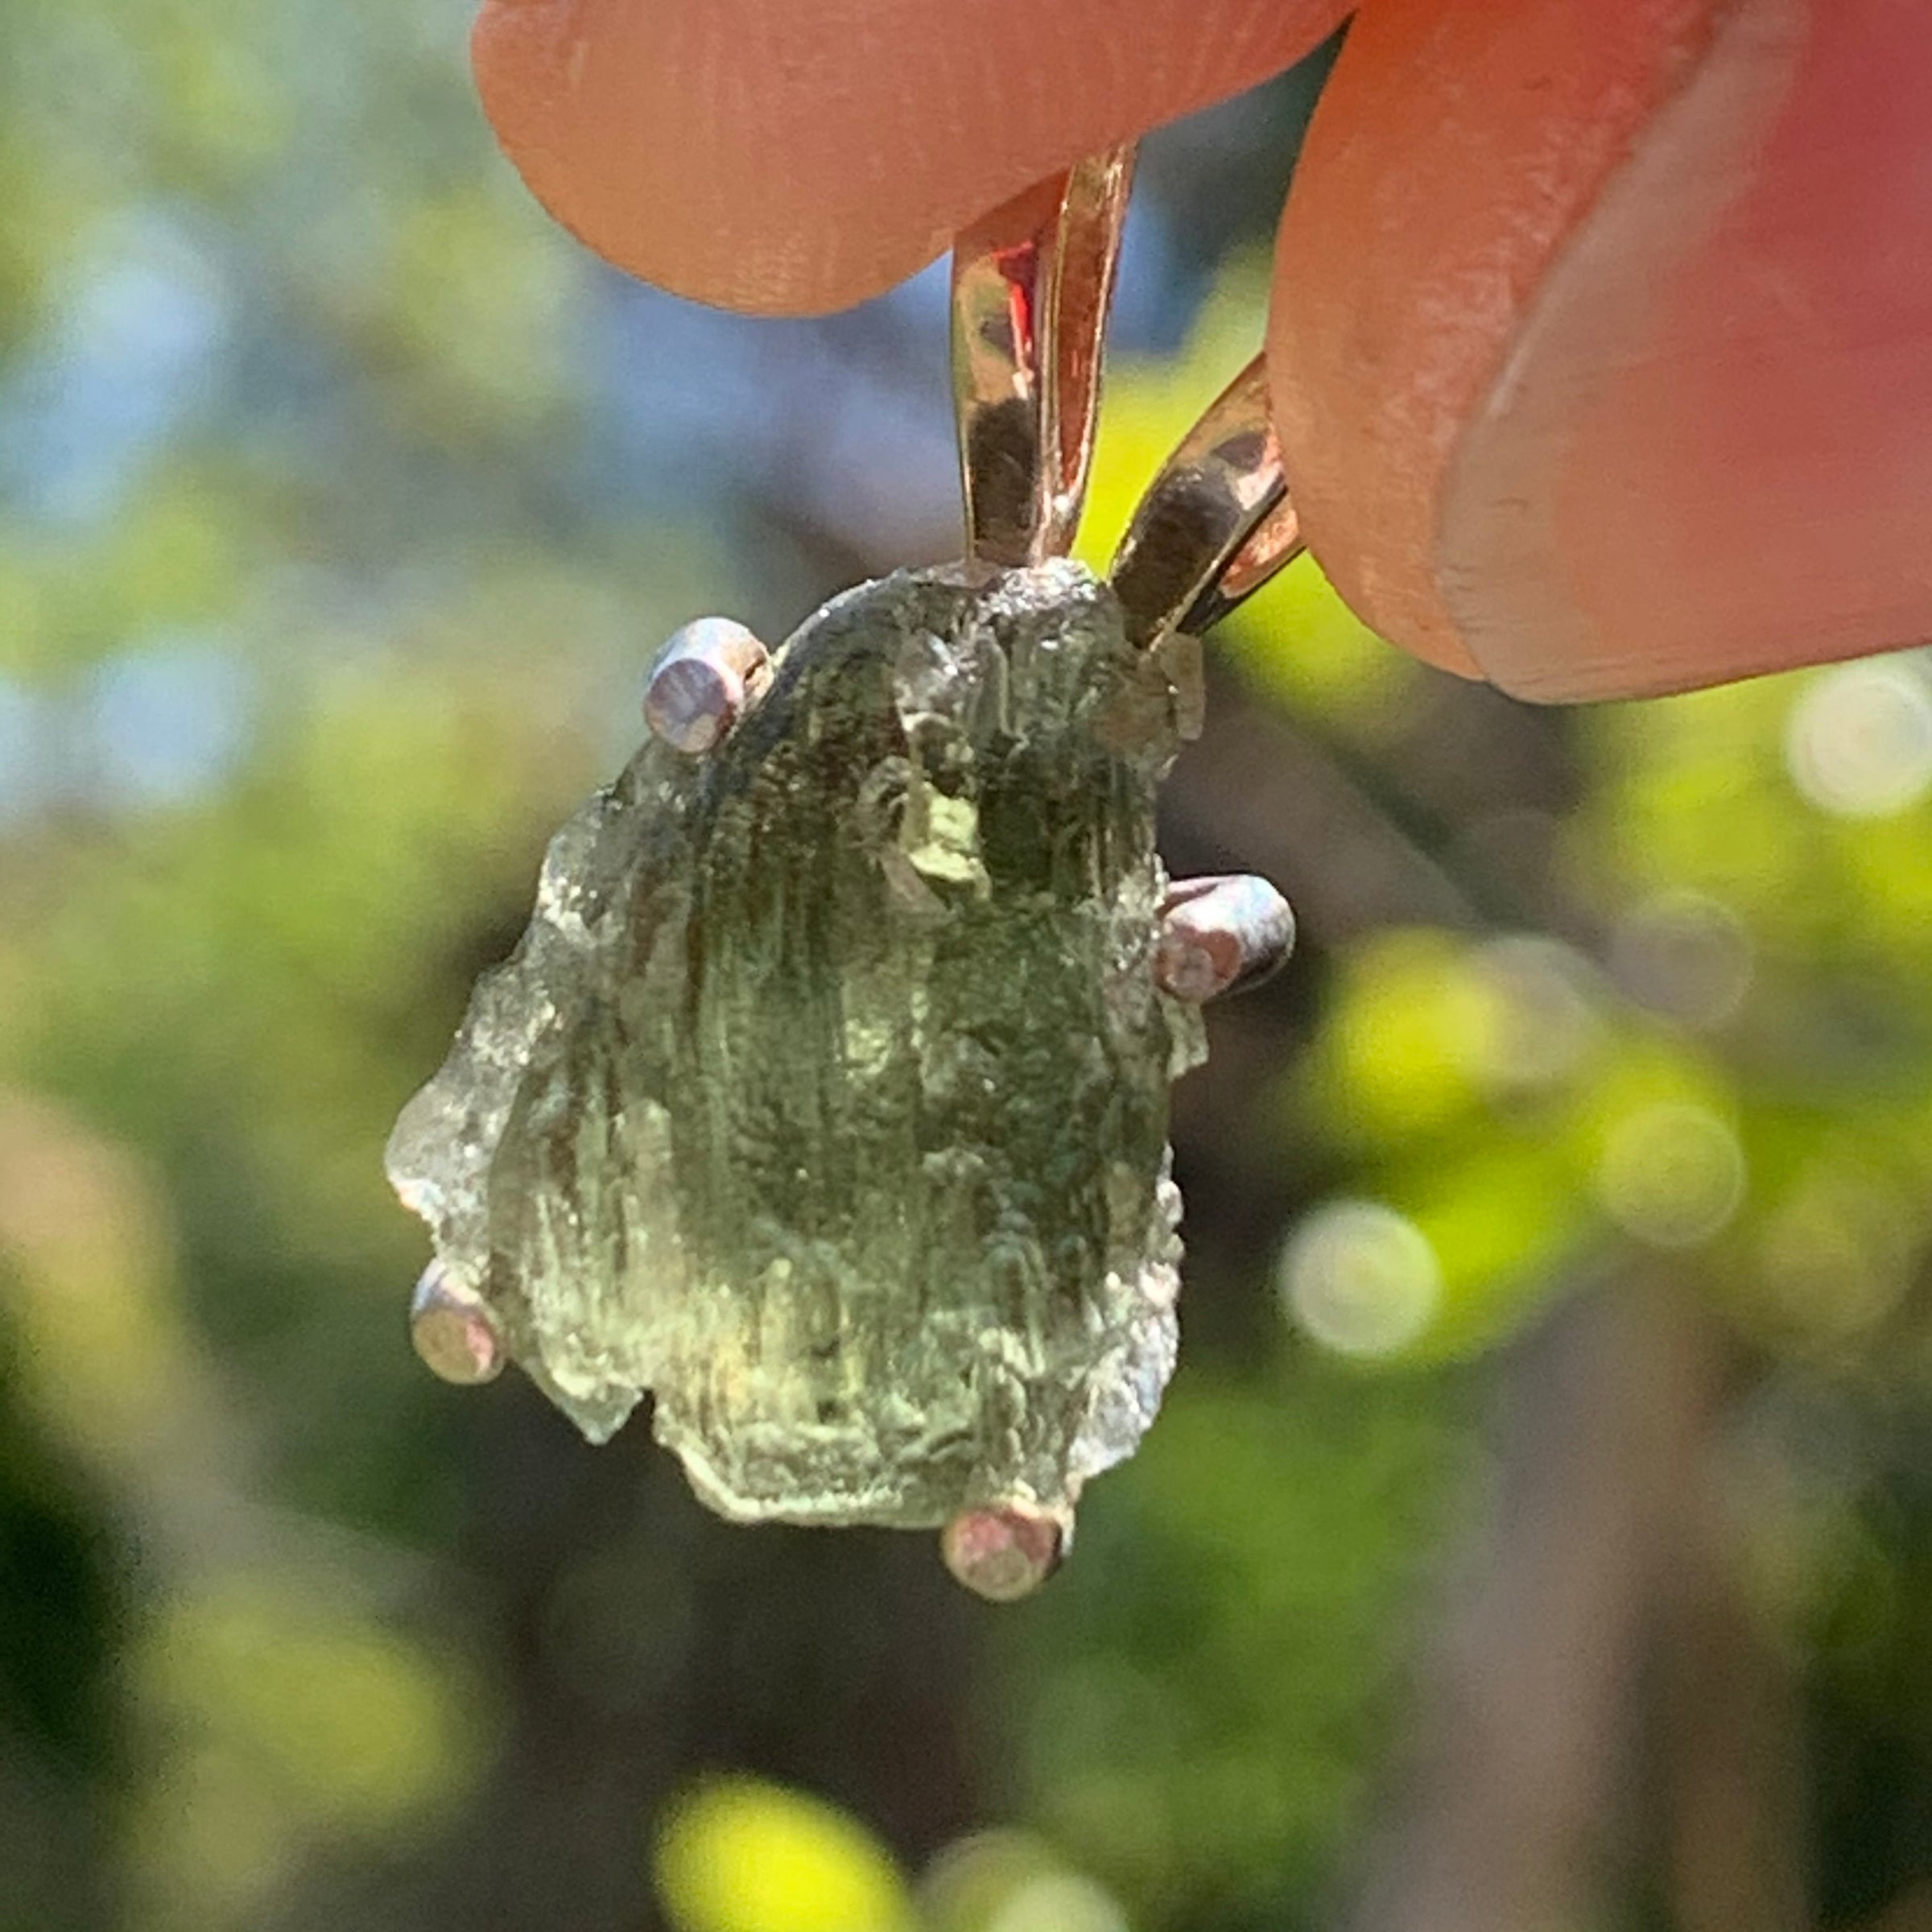 raw moldavite tektite in 4 prong sterling silver basket pendant held in hand with sunlight shining through it